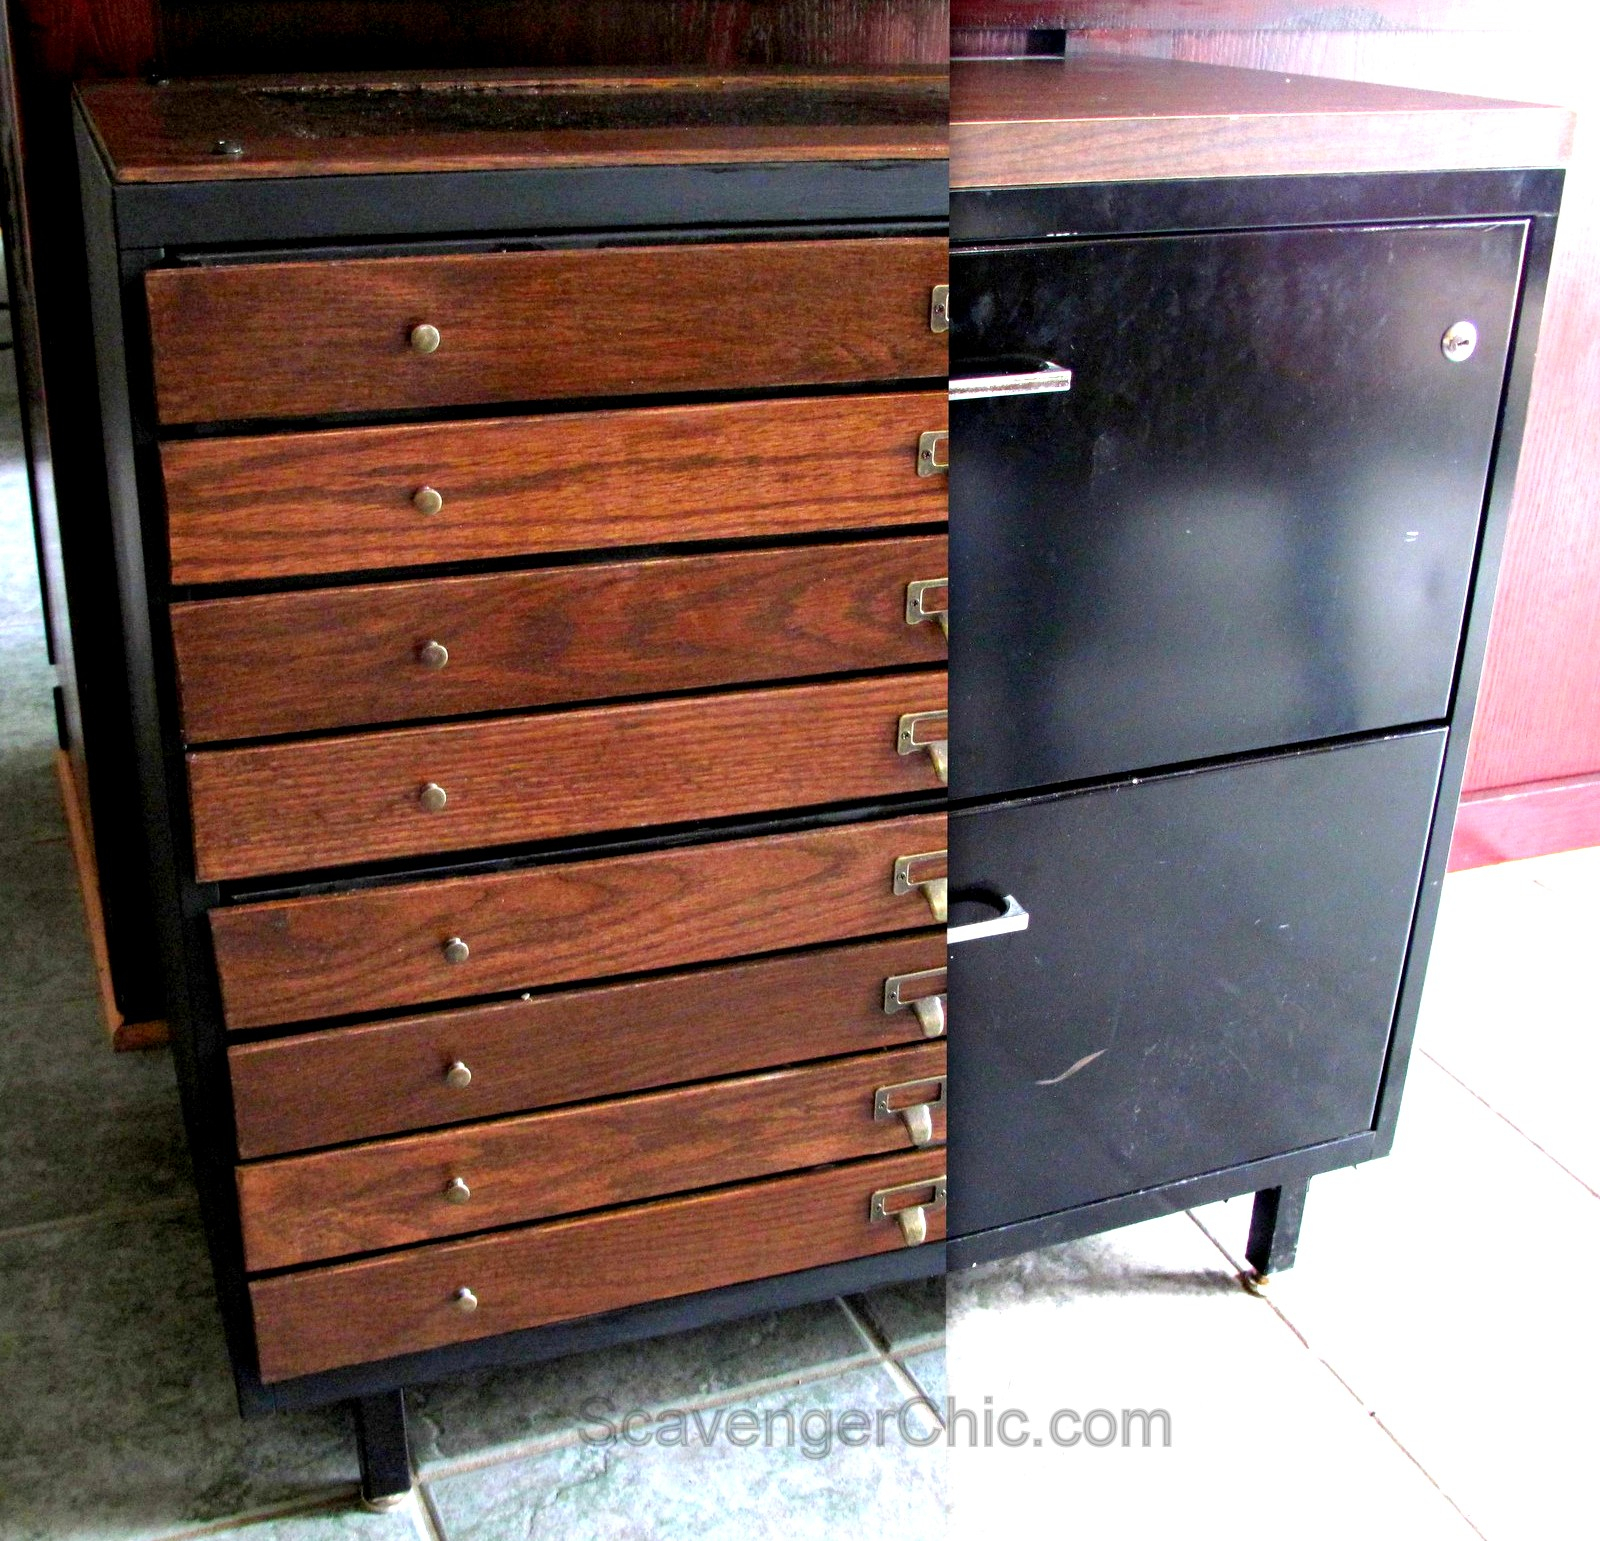 New Life For An Old File Cabinet Scavenger Chic pertaining to sizing 1600 X 1541